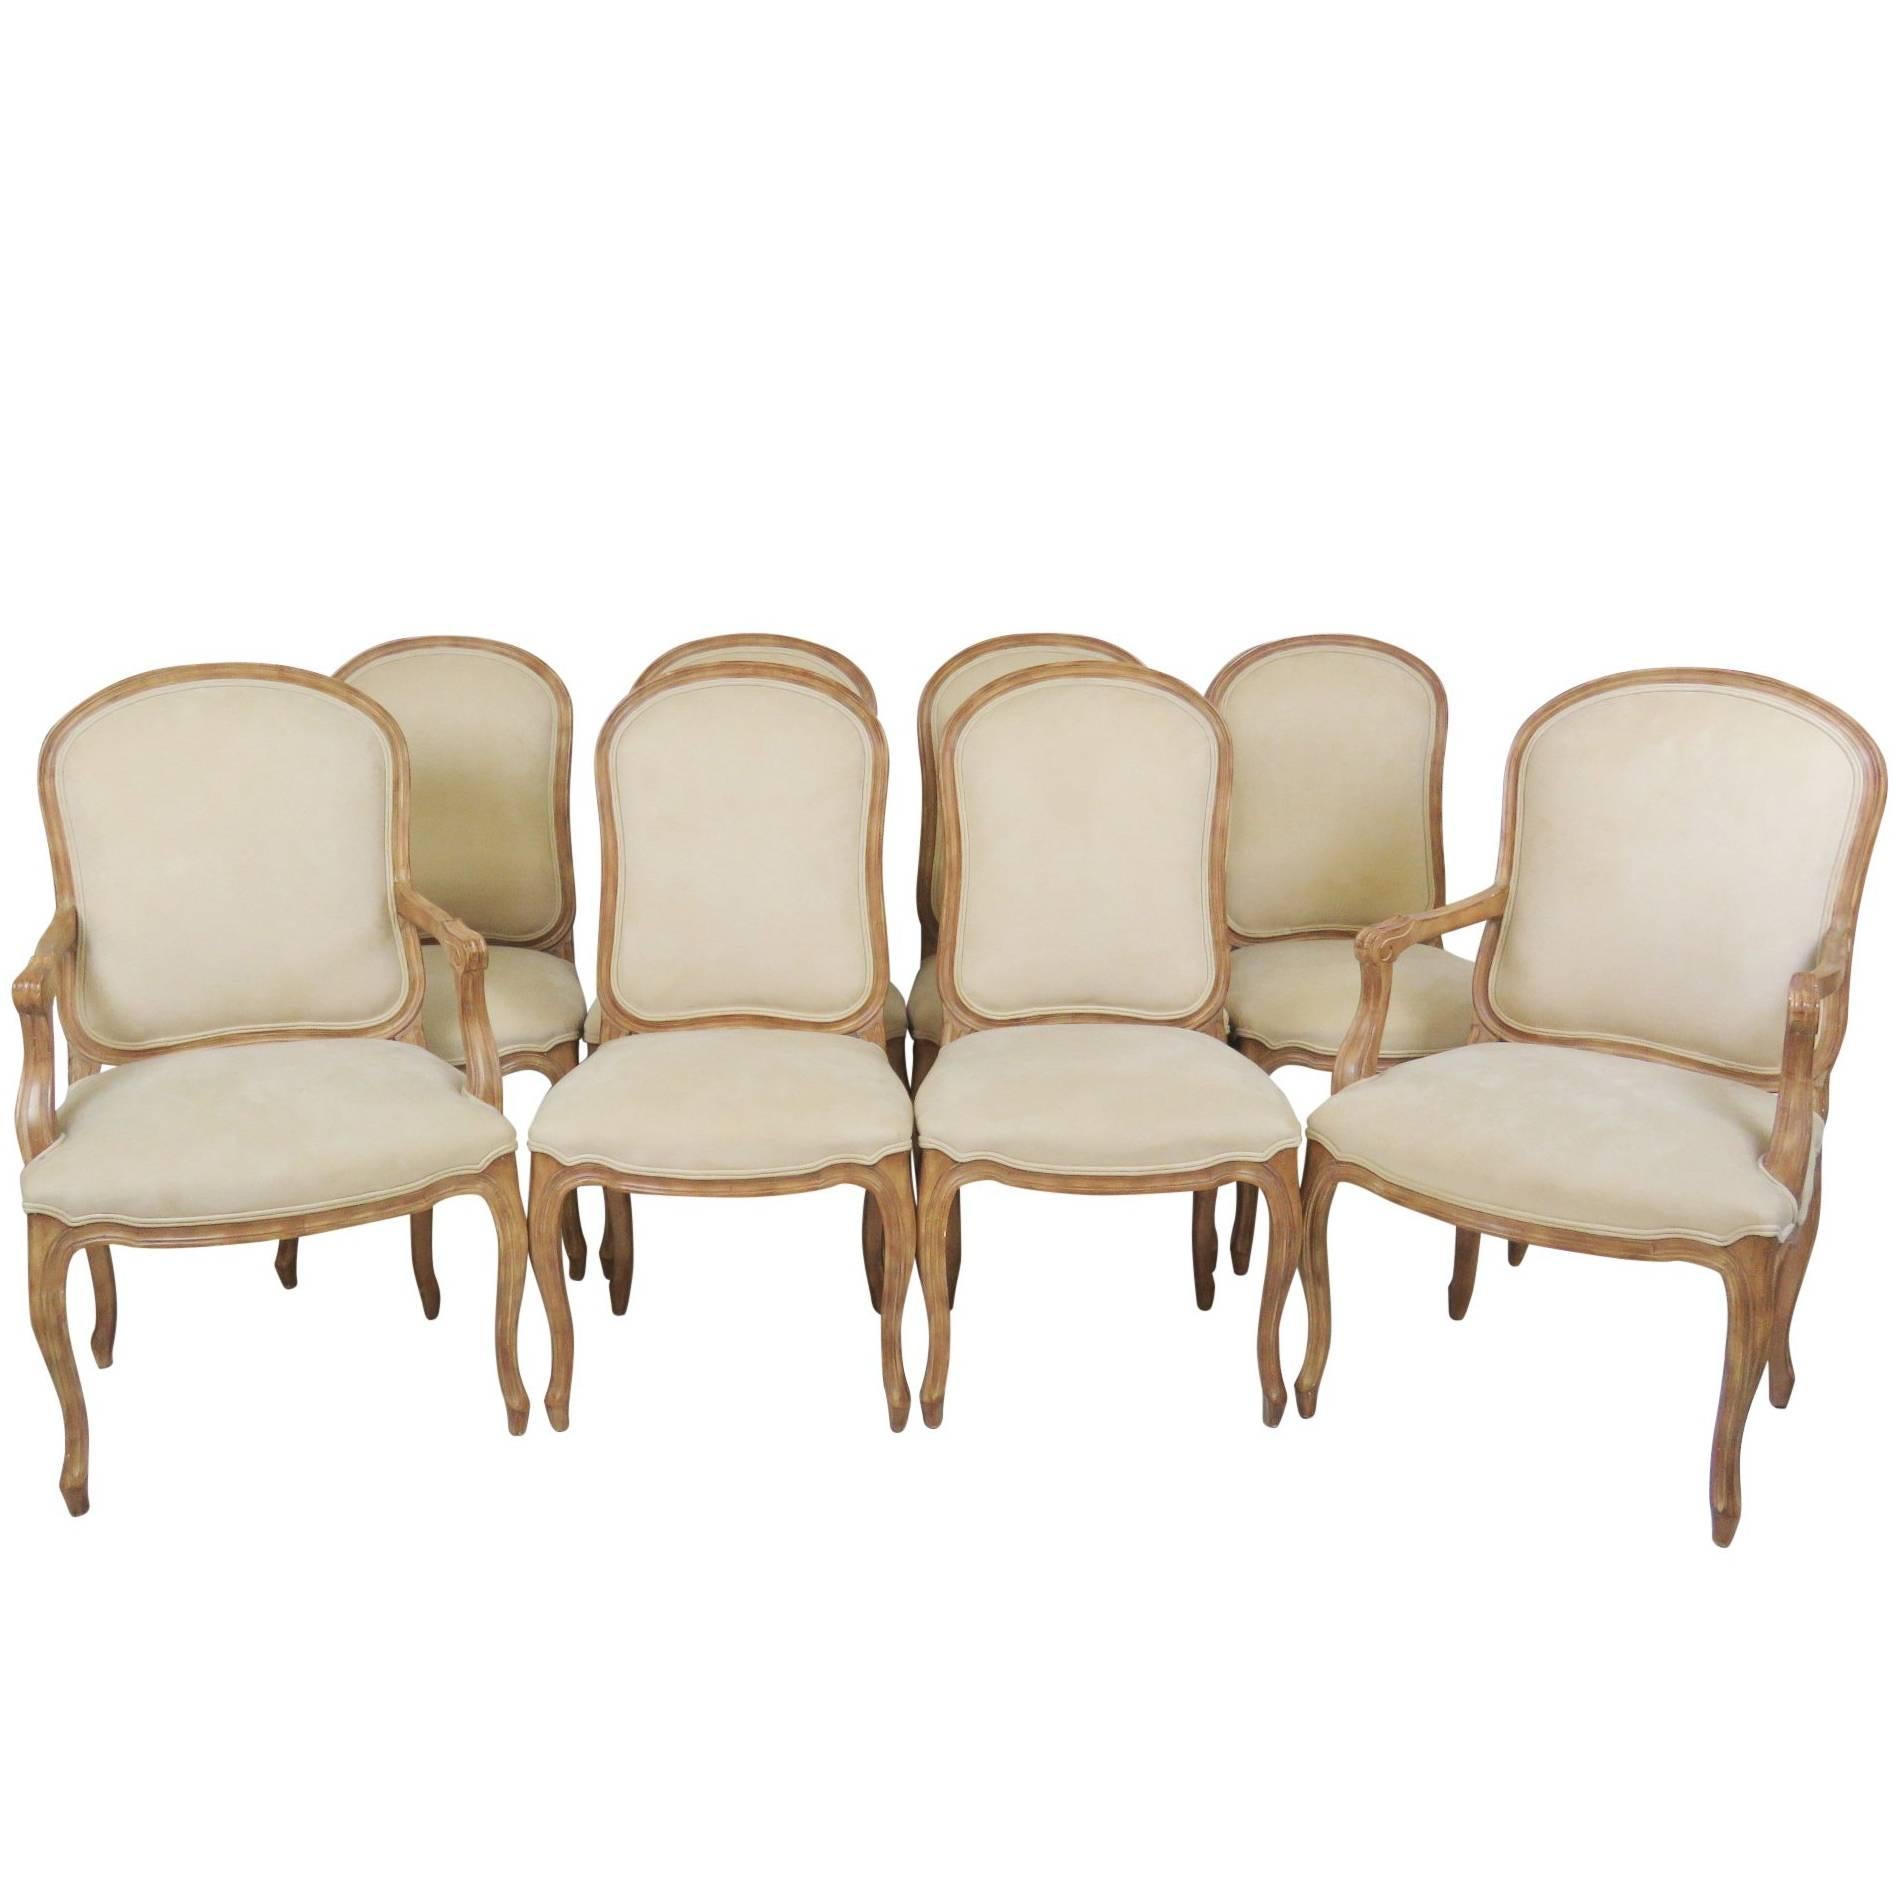 Eight Louis XVI Style Upholstered Dining Chairs